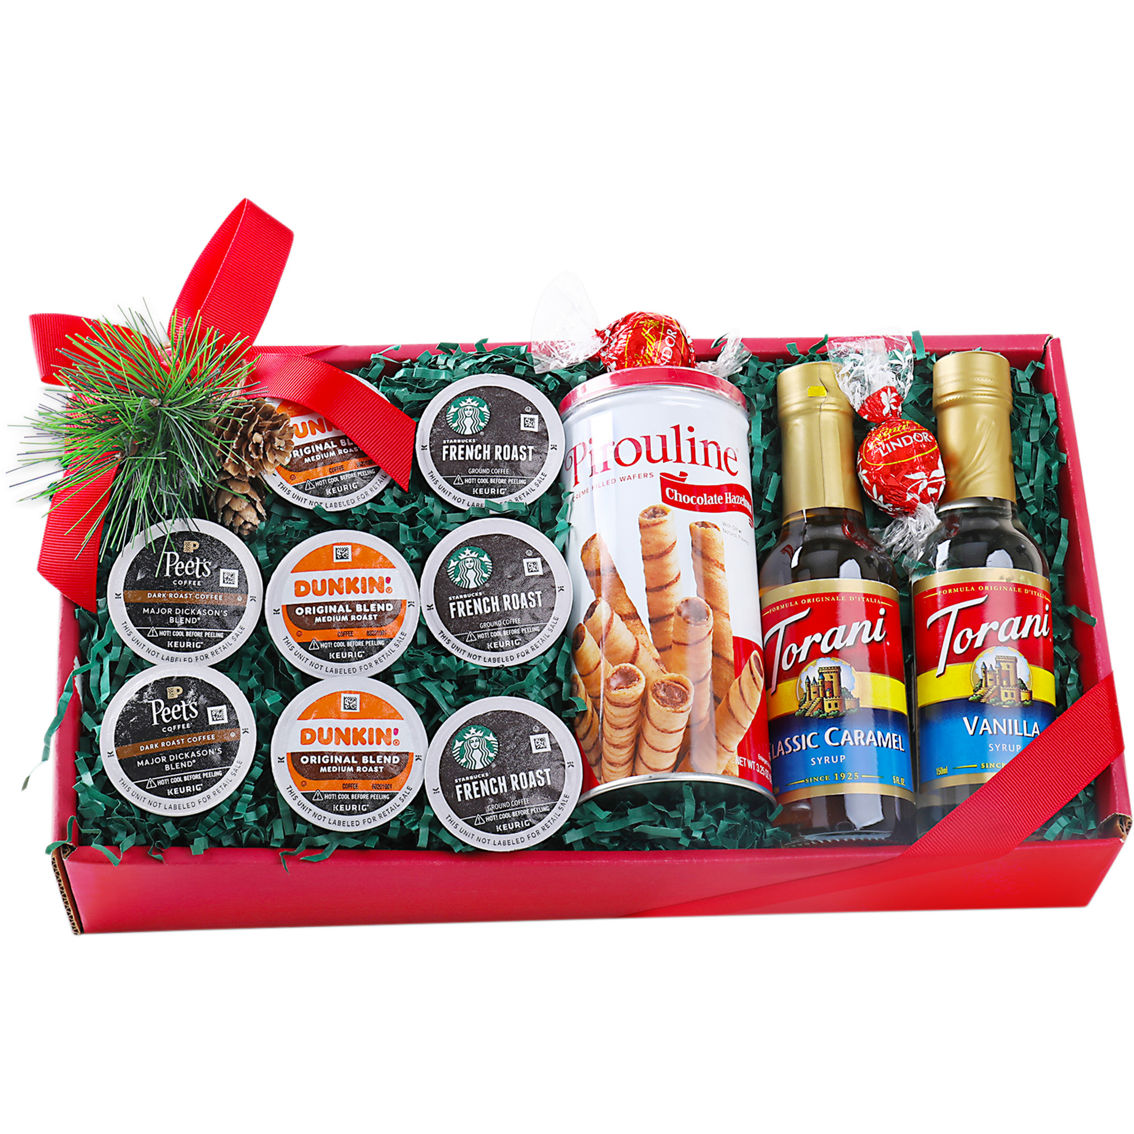 Alder Creek Holiday Coffee Gift - Image 1 of 3